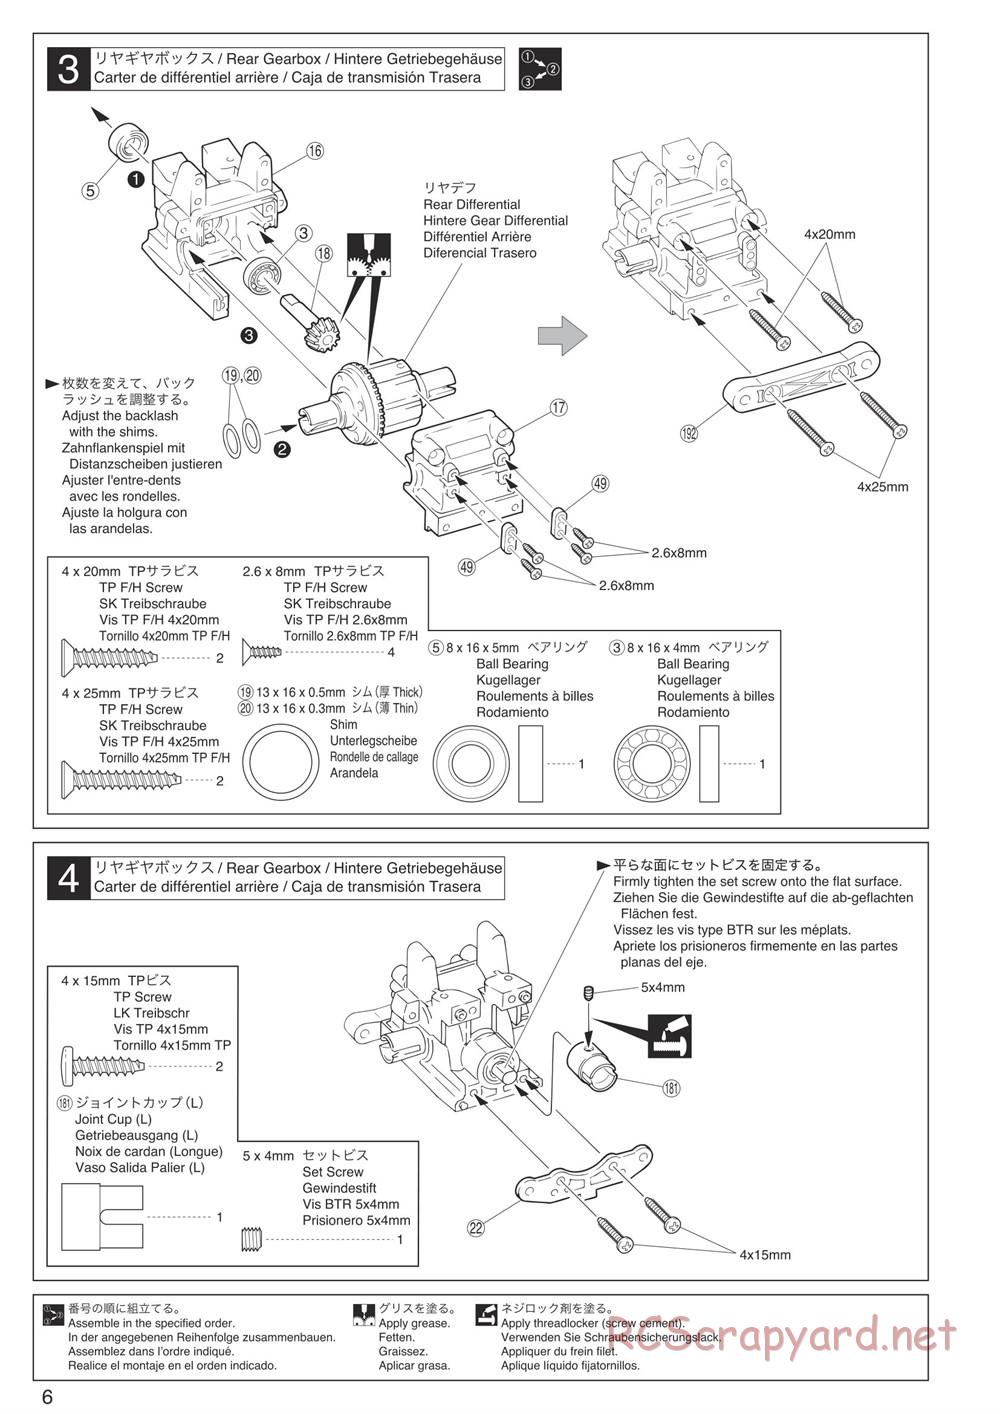 Kyosho - Inferno Neo 3.0 - Manual - Page 6